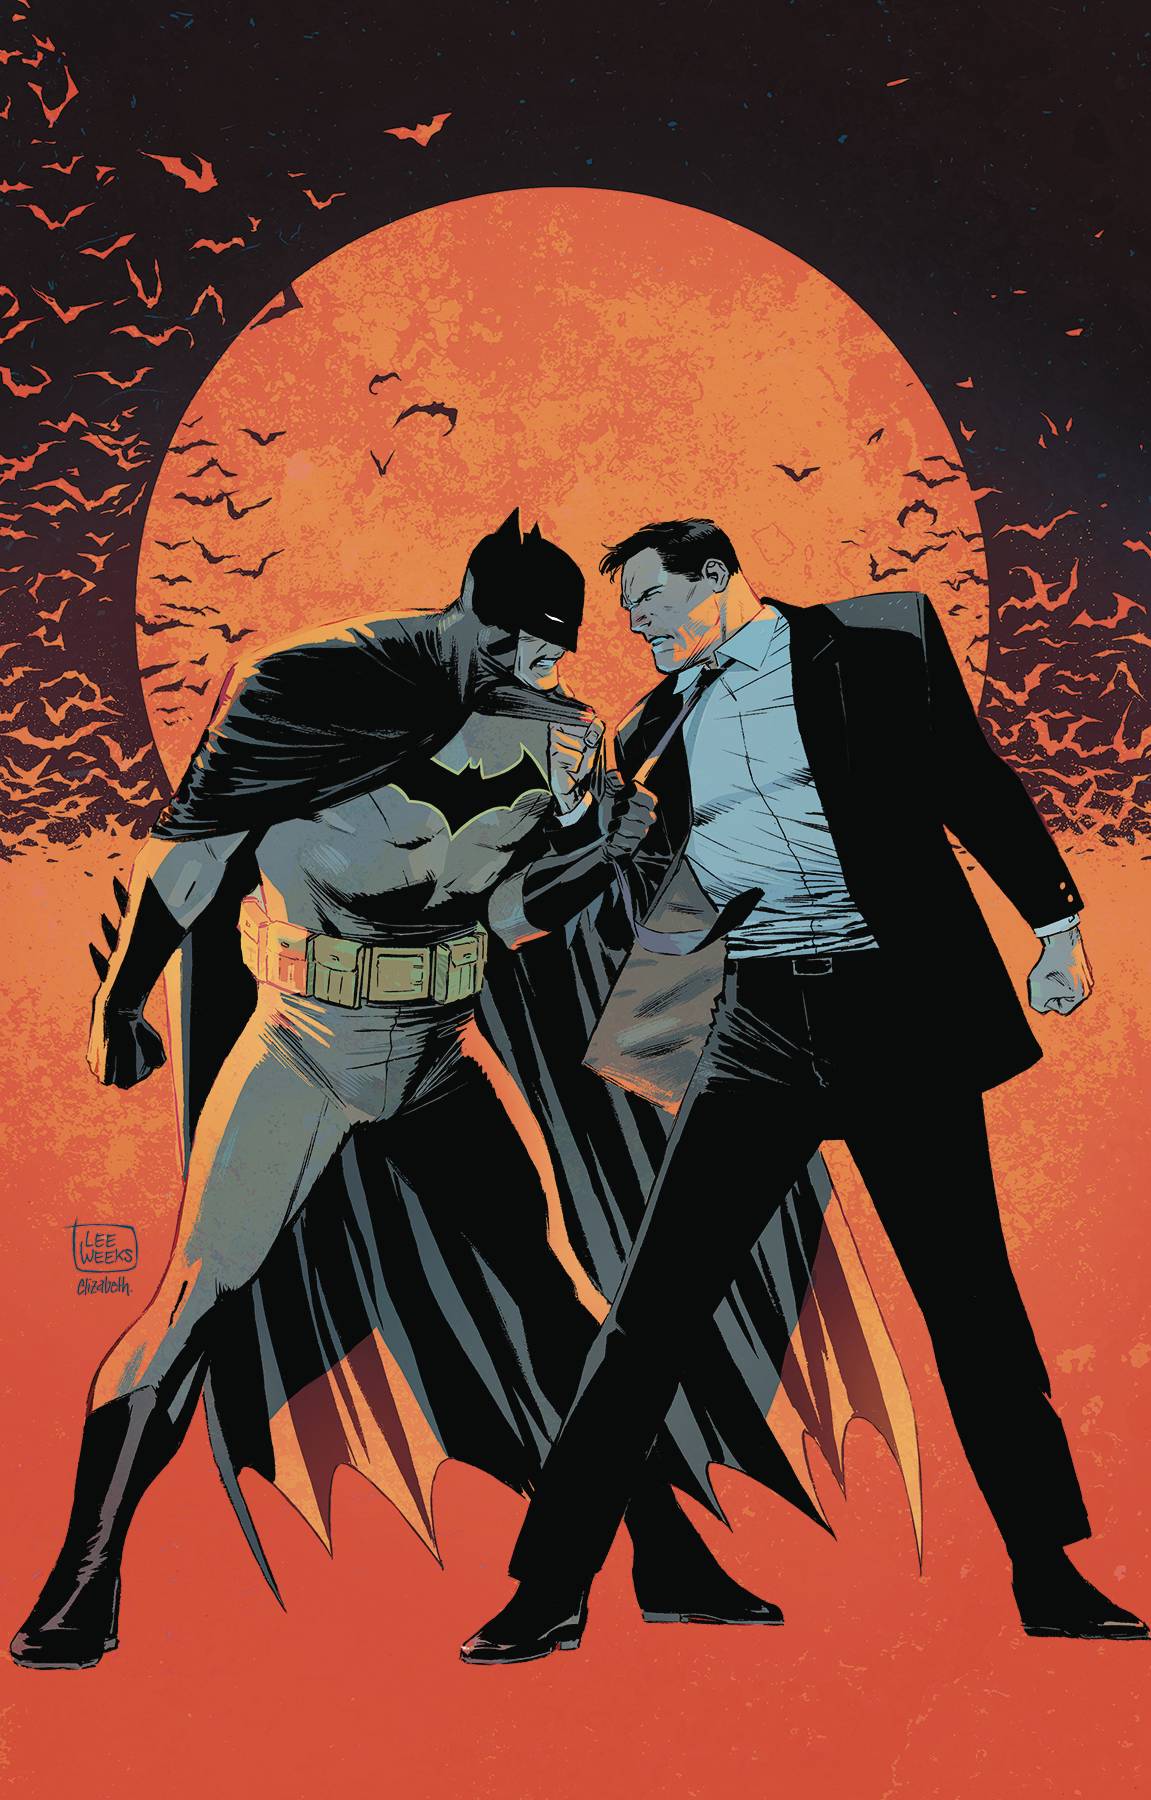 Batman by Tom King and Lee Weeks - The Deluxe Edition - One of the Best Batman Comics